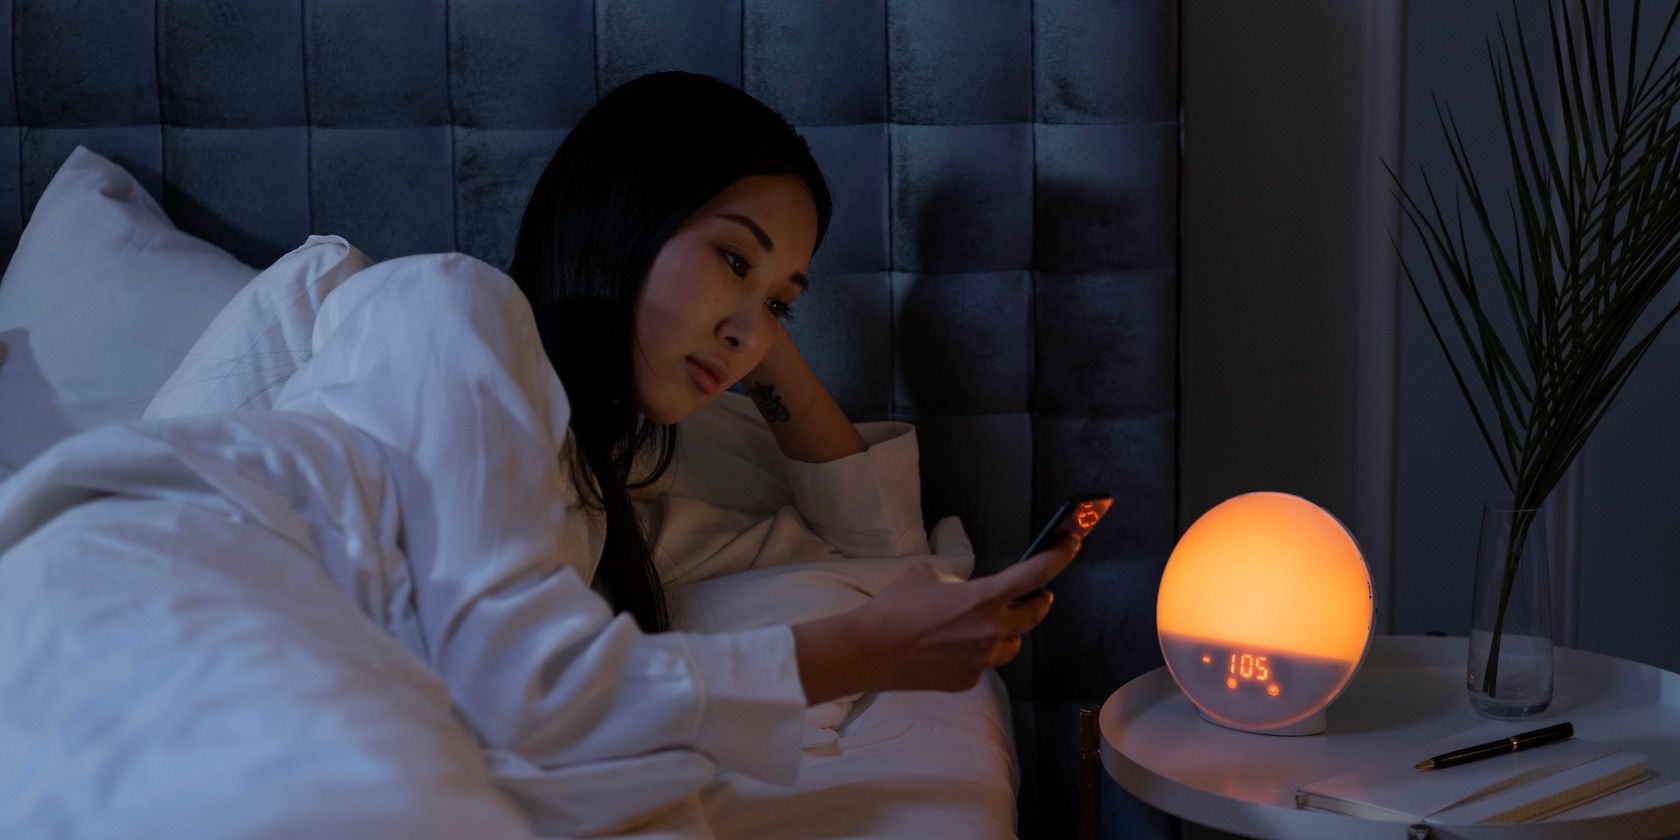 person using phone in bed nighttime